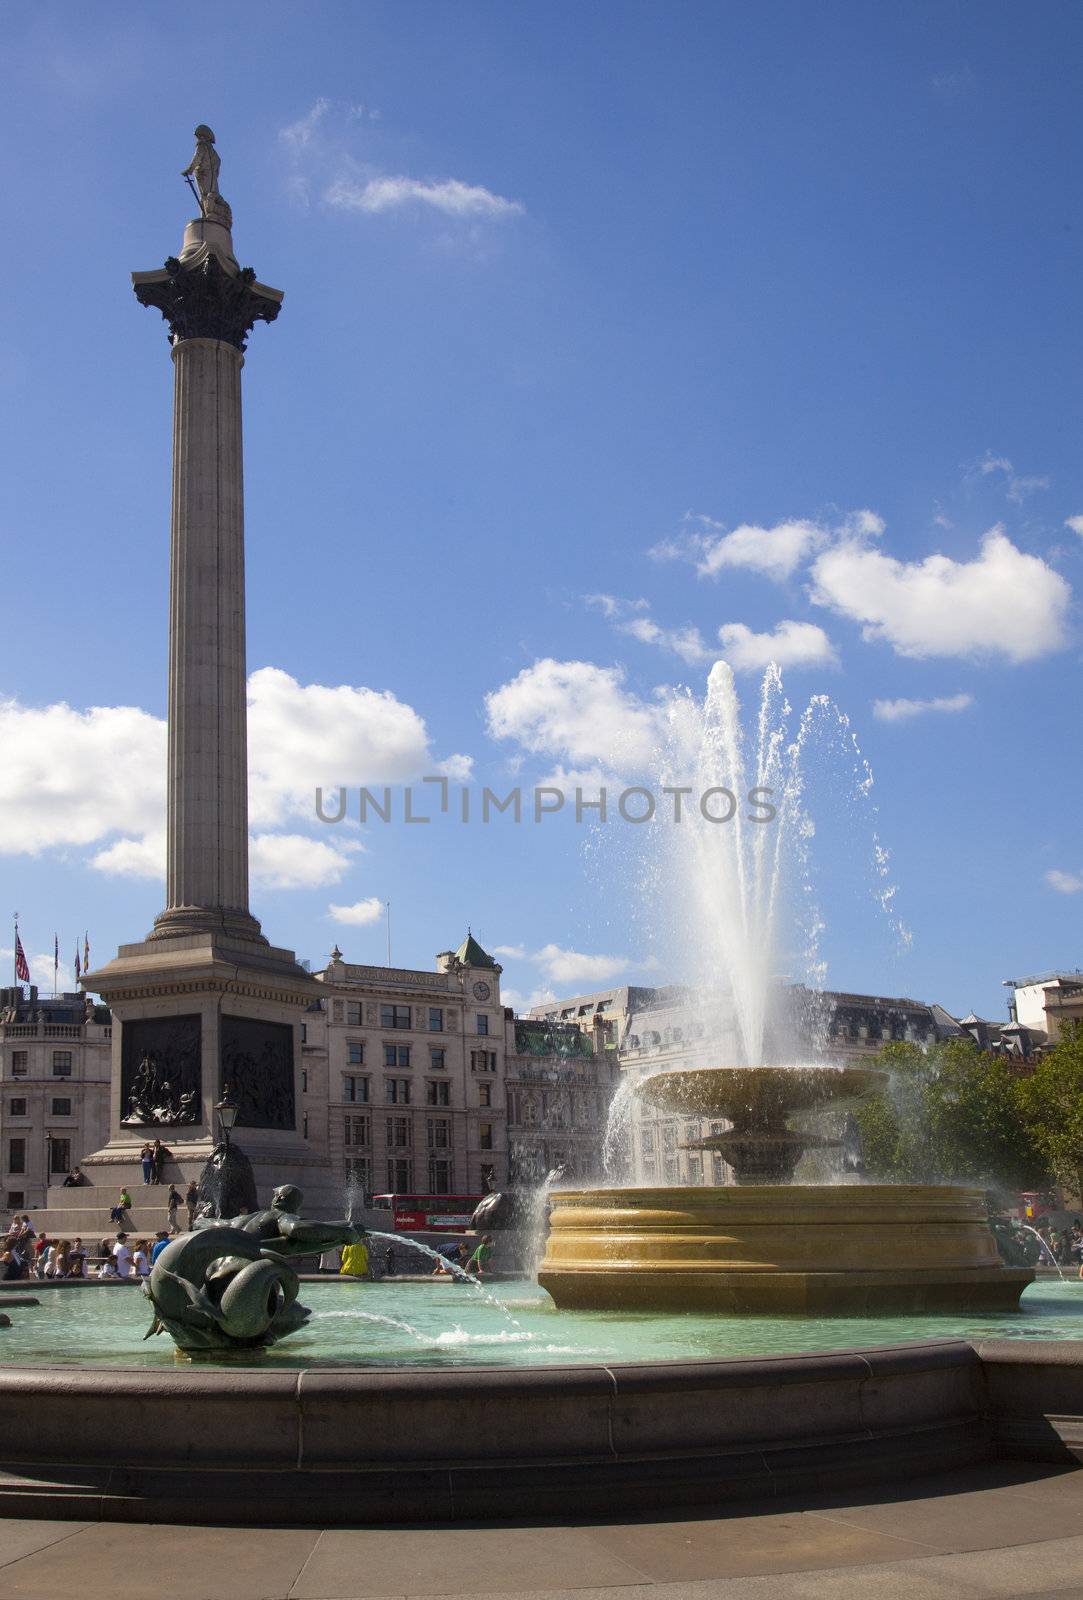 A view of Nelson's Column and the fountains in Trafalgar Square. London.